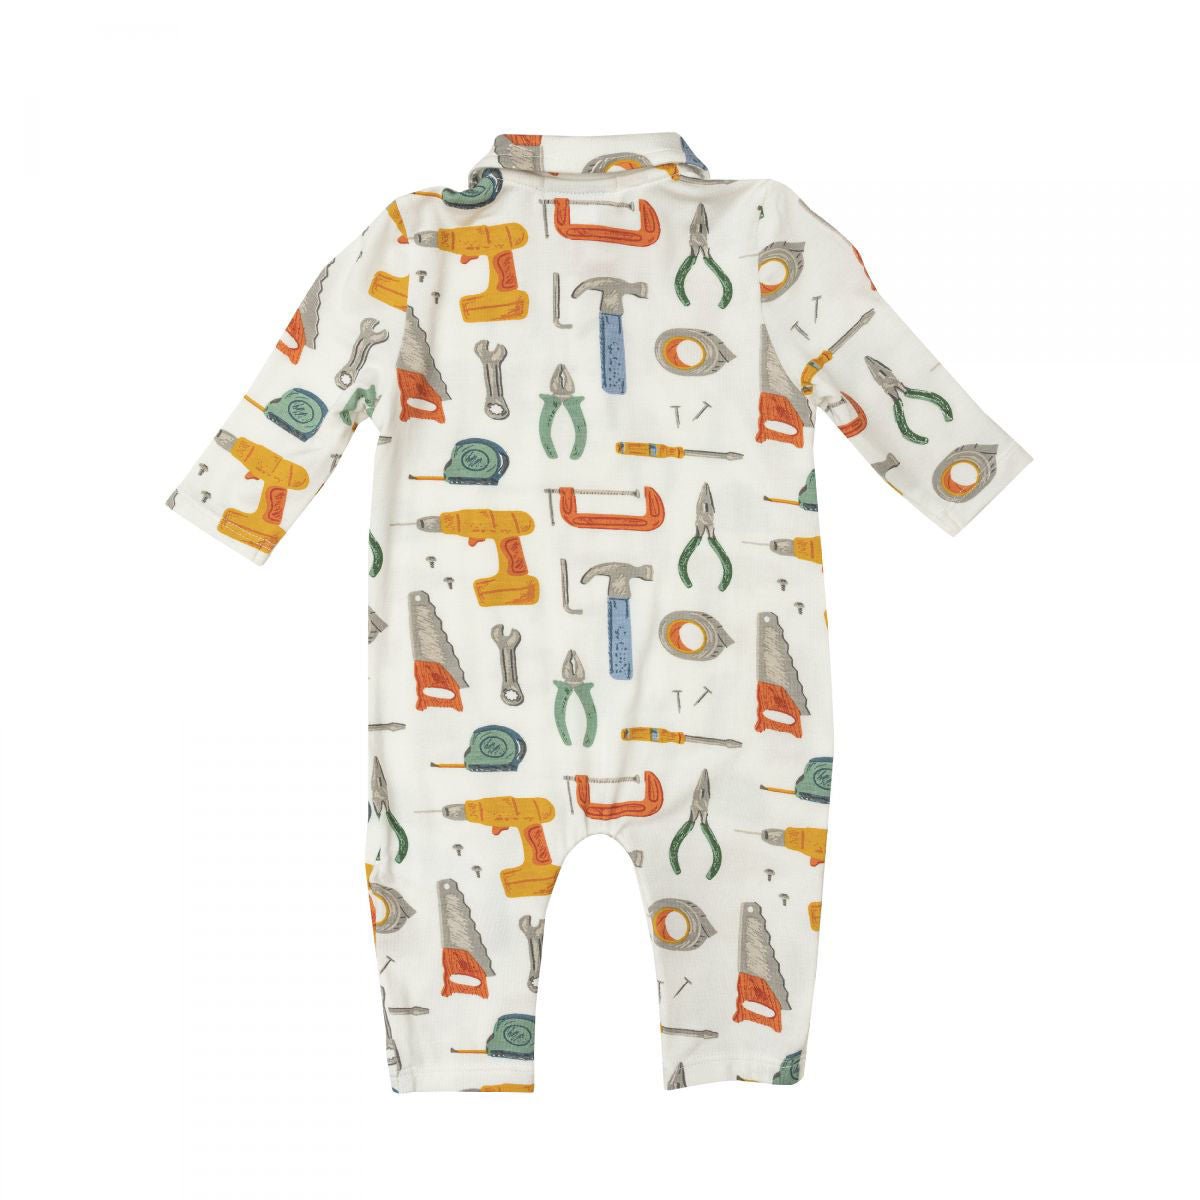 Button Down Tools Coveralls - Joy